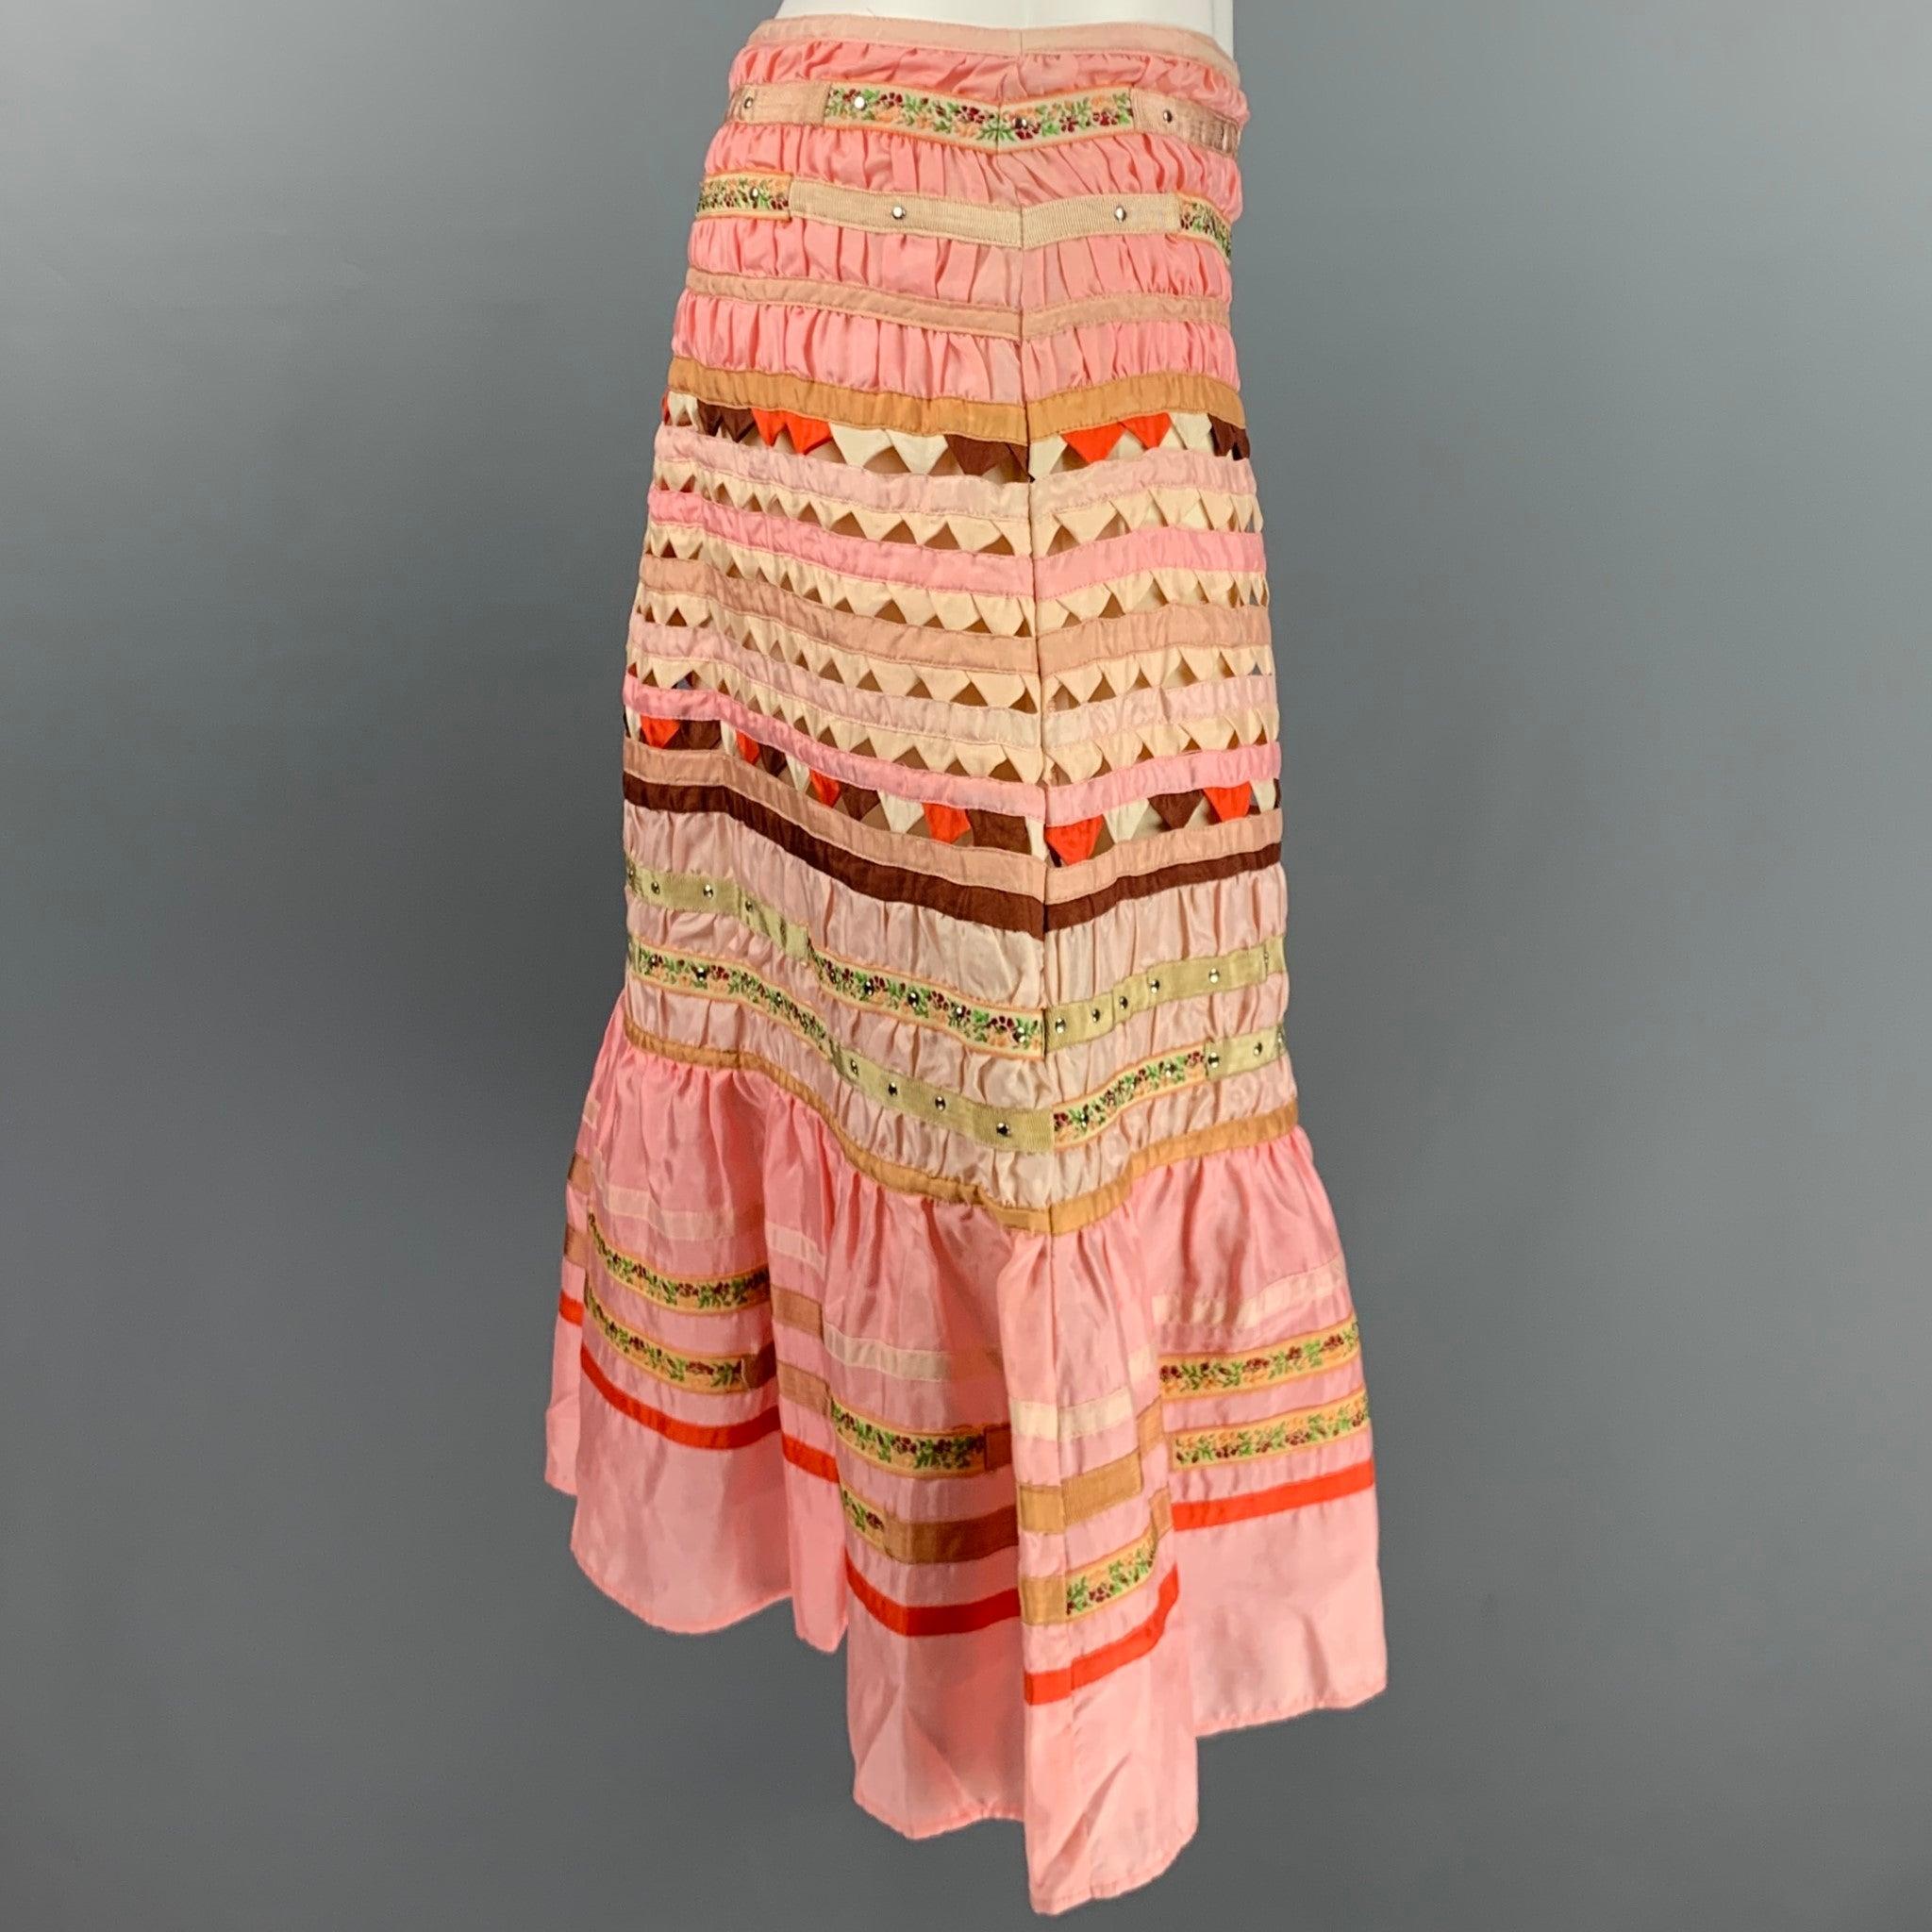 BLUMARINE skirt in a pink and beige silk fabric featuring vibrant stripes, floral ribbon details, silver tone stud details, an A-line style, and side snap closure.. Made in Italy.New with Tags. 

Marked:   IT 40 

Measurements: 
  Waist: 28 inches